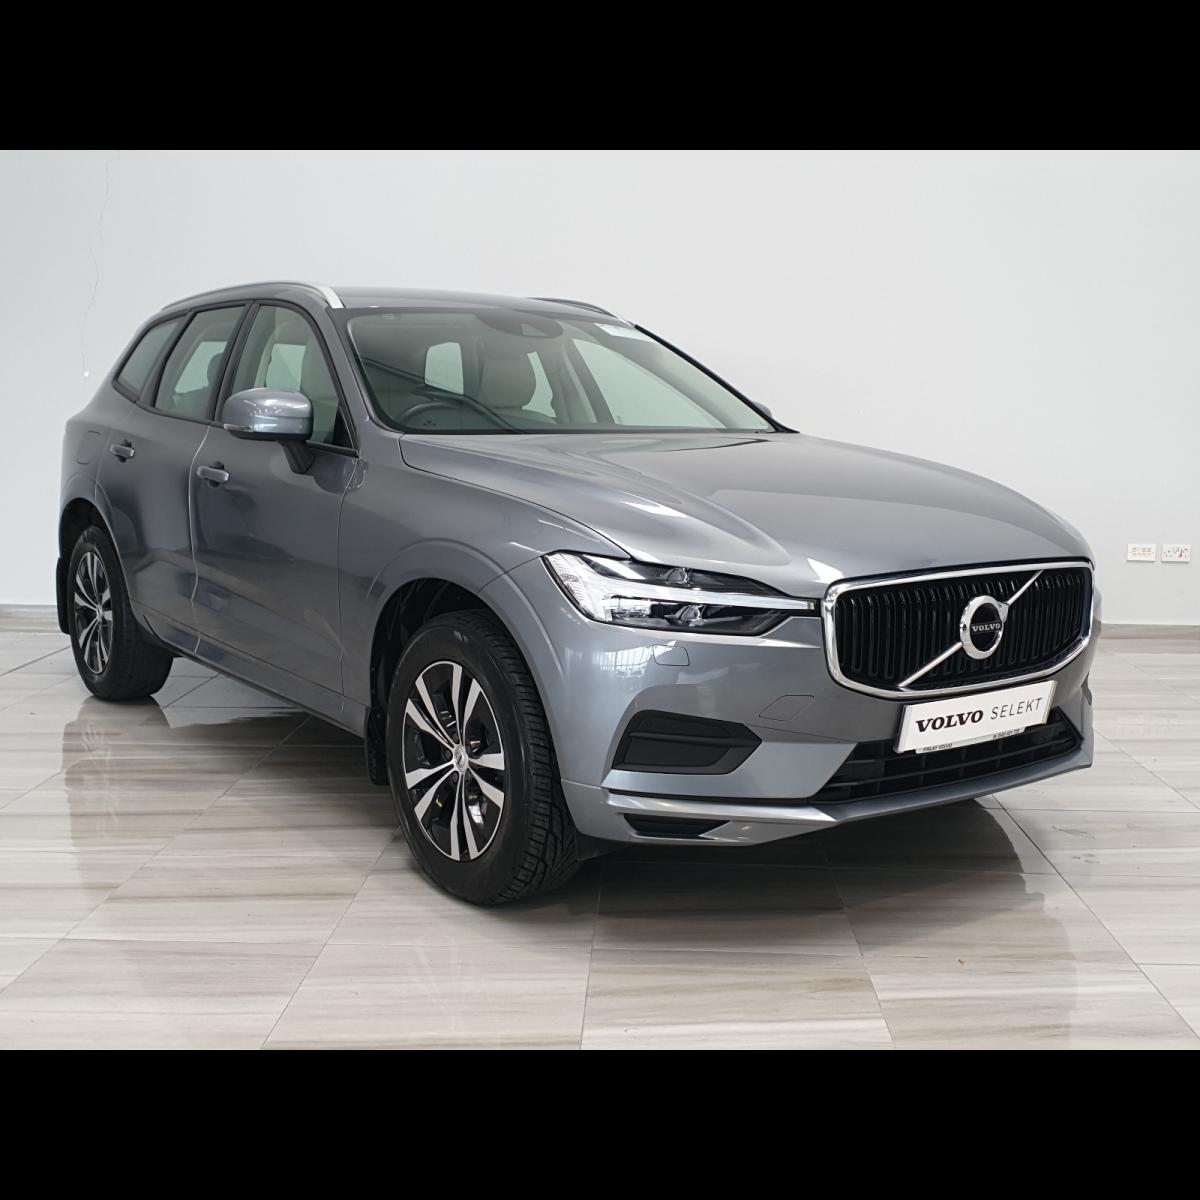 Volvo Car of the Week: 211 Volvo XC60 B4 Mild Hybrid - Uncompromising Luxury and Performance